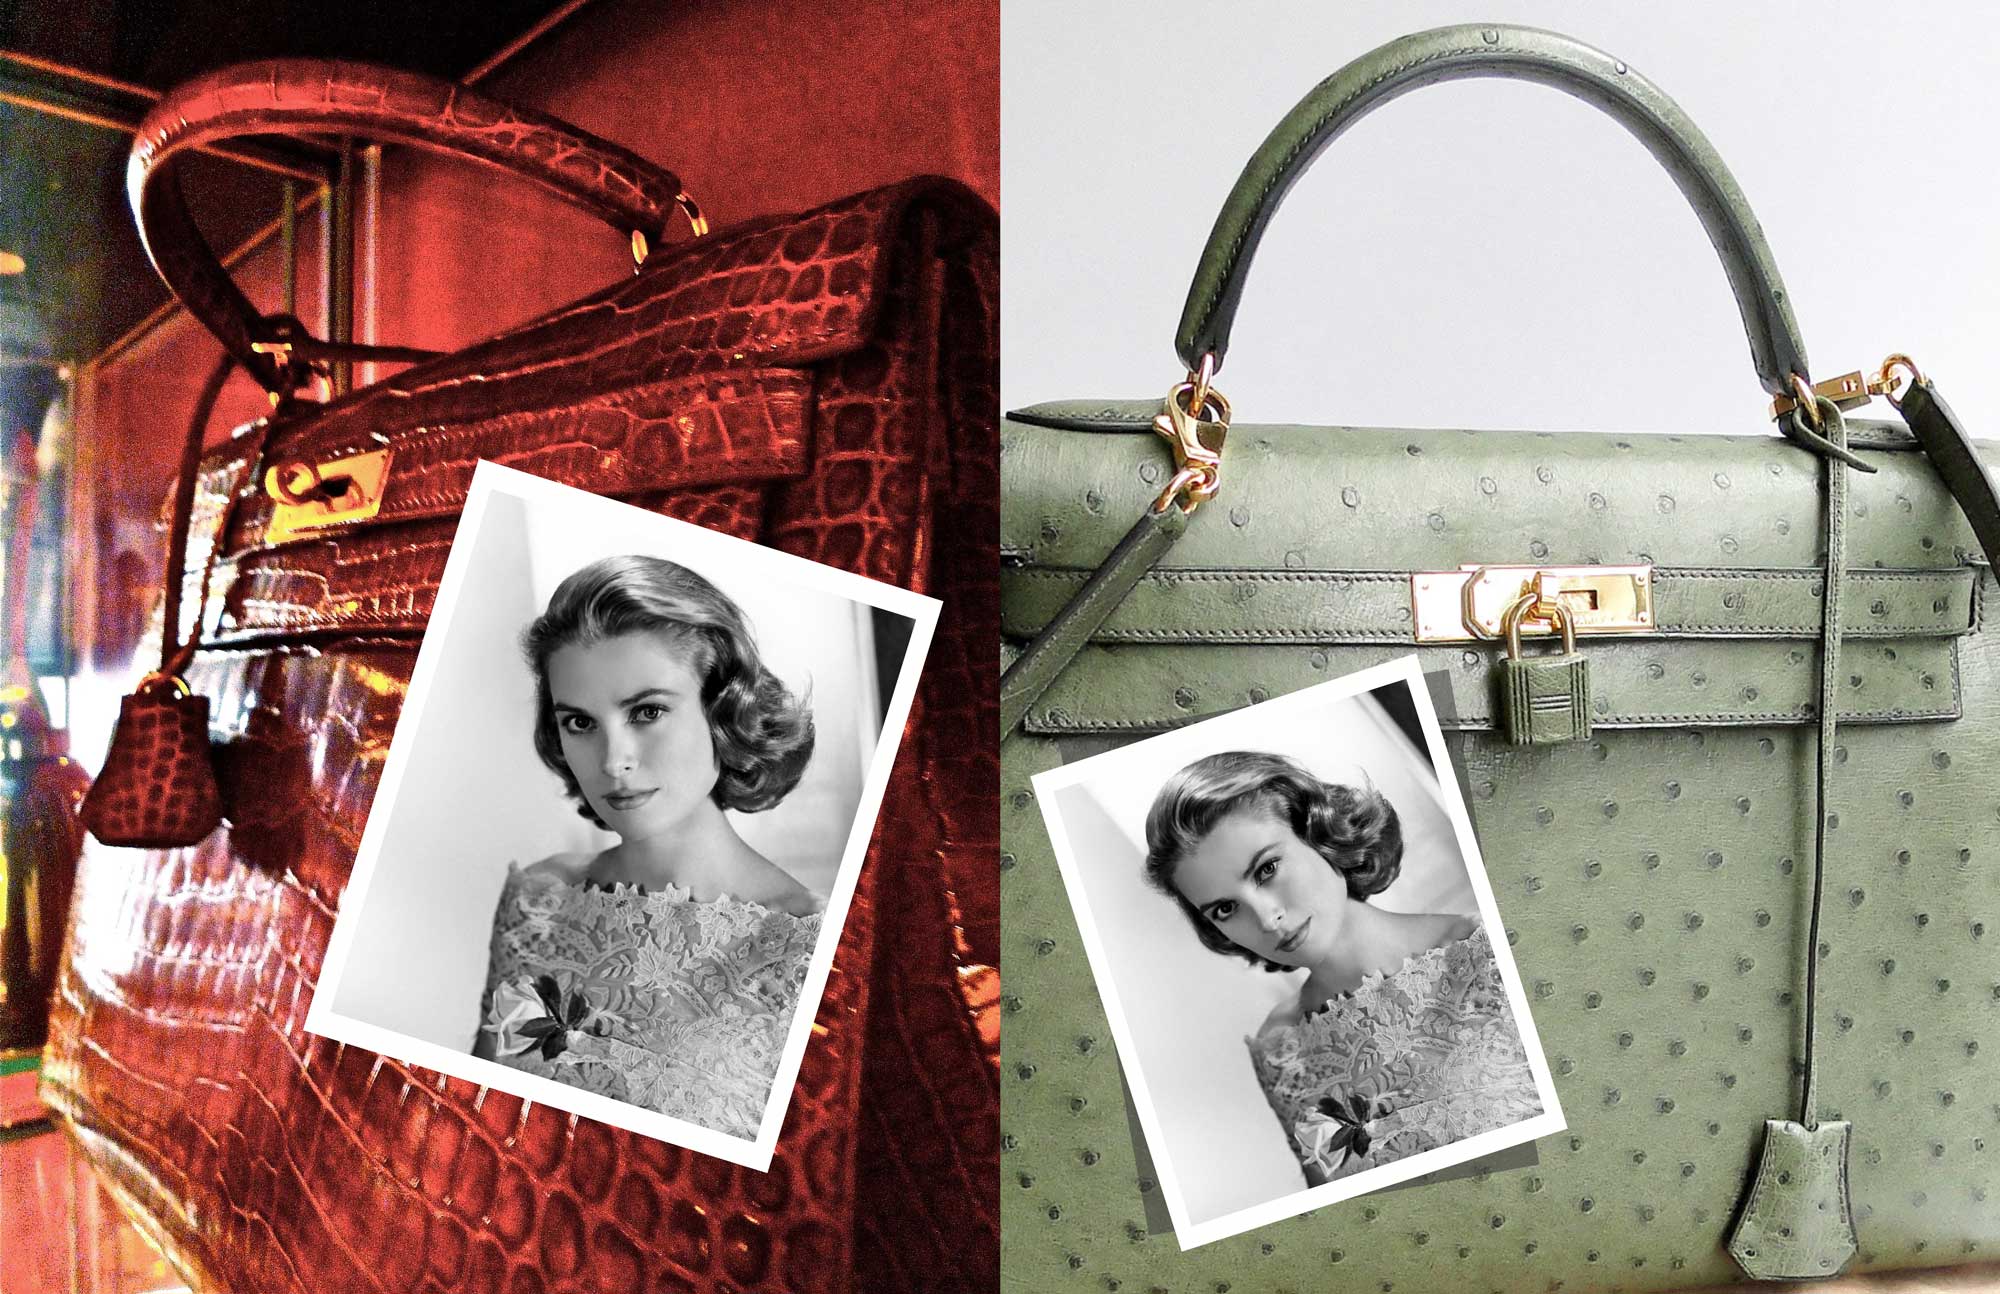 History of the Hermes Kelly Bag and Grace Kelly